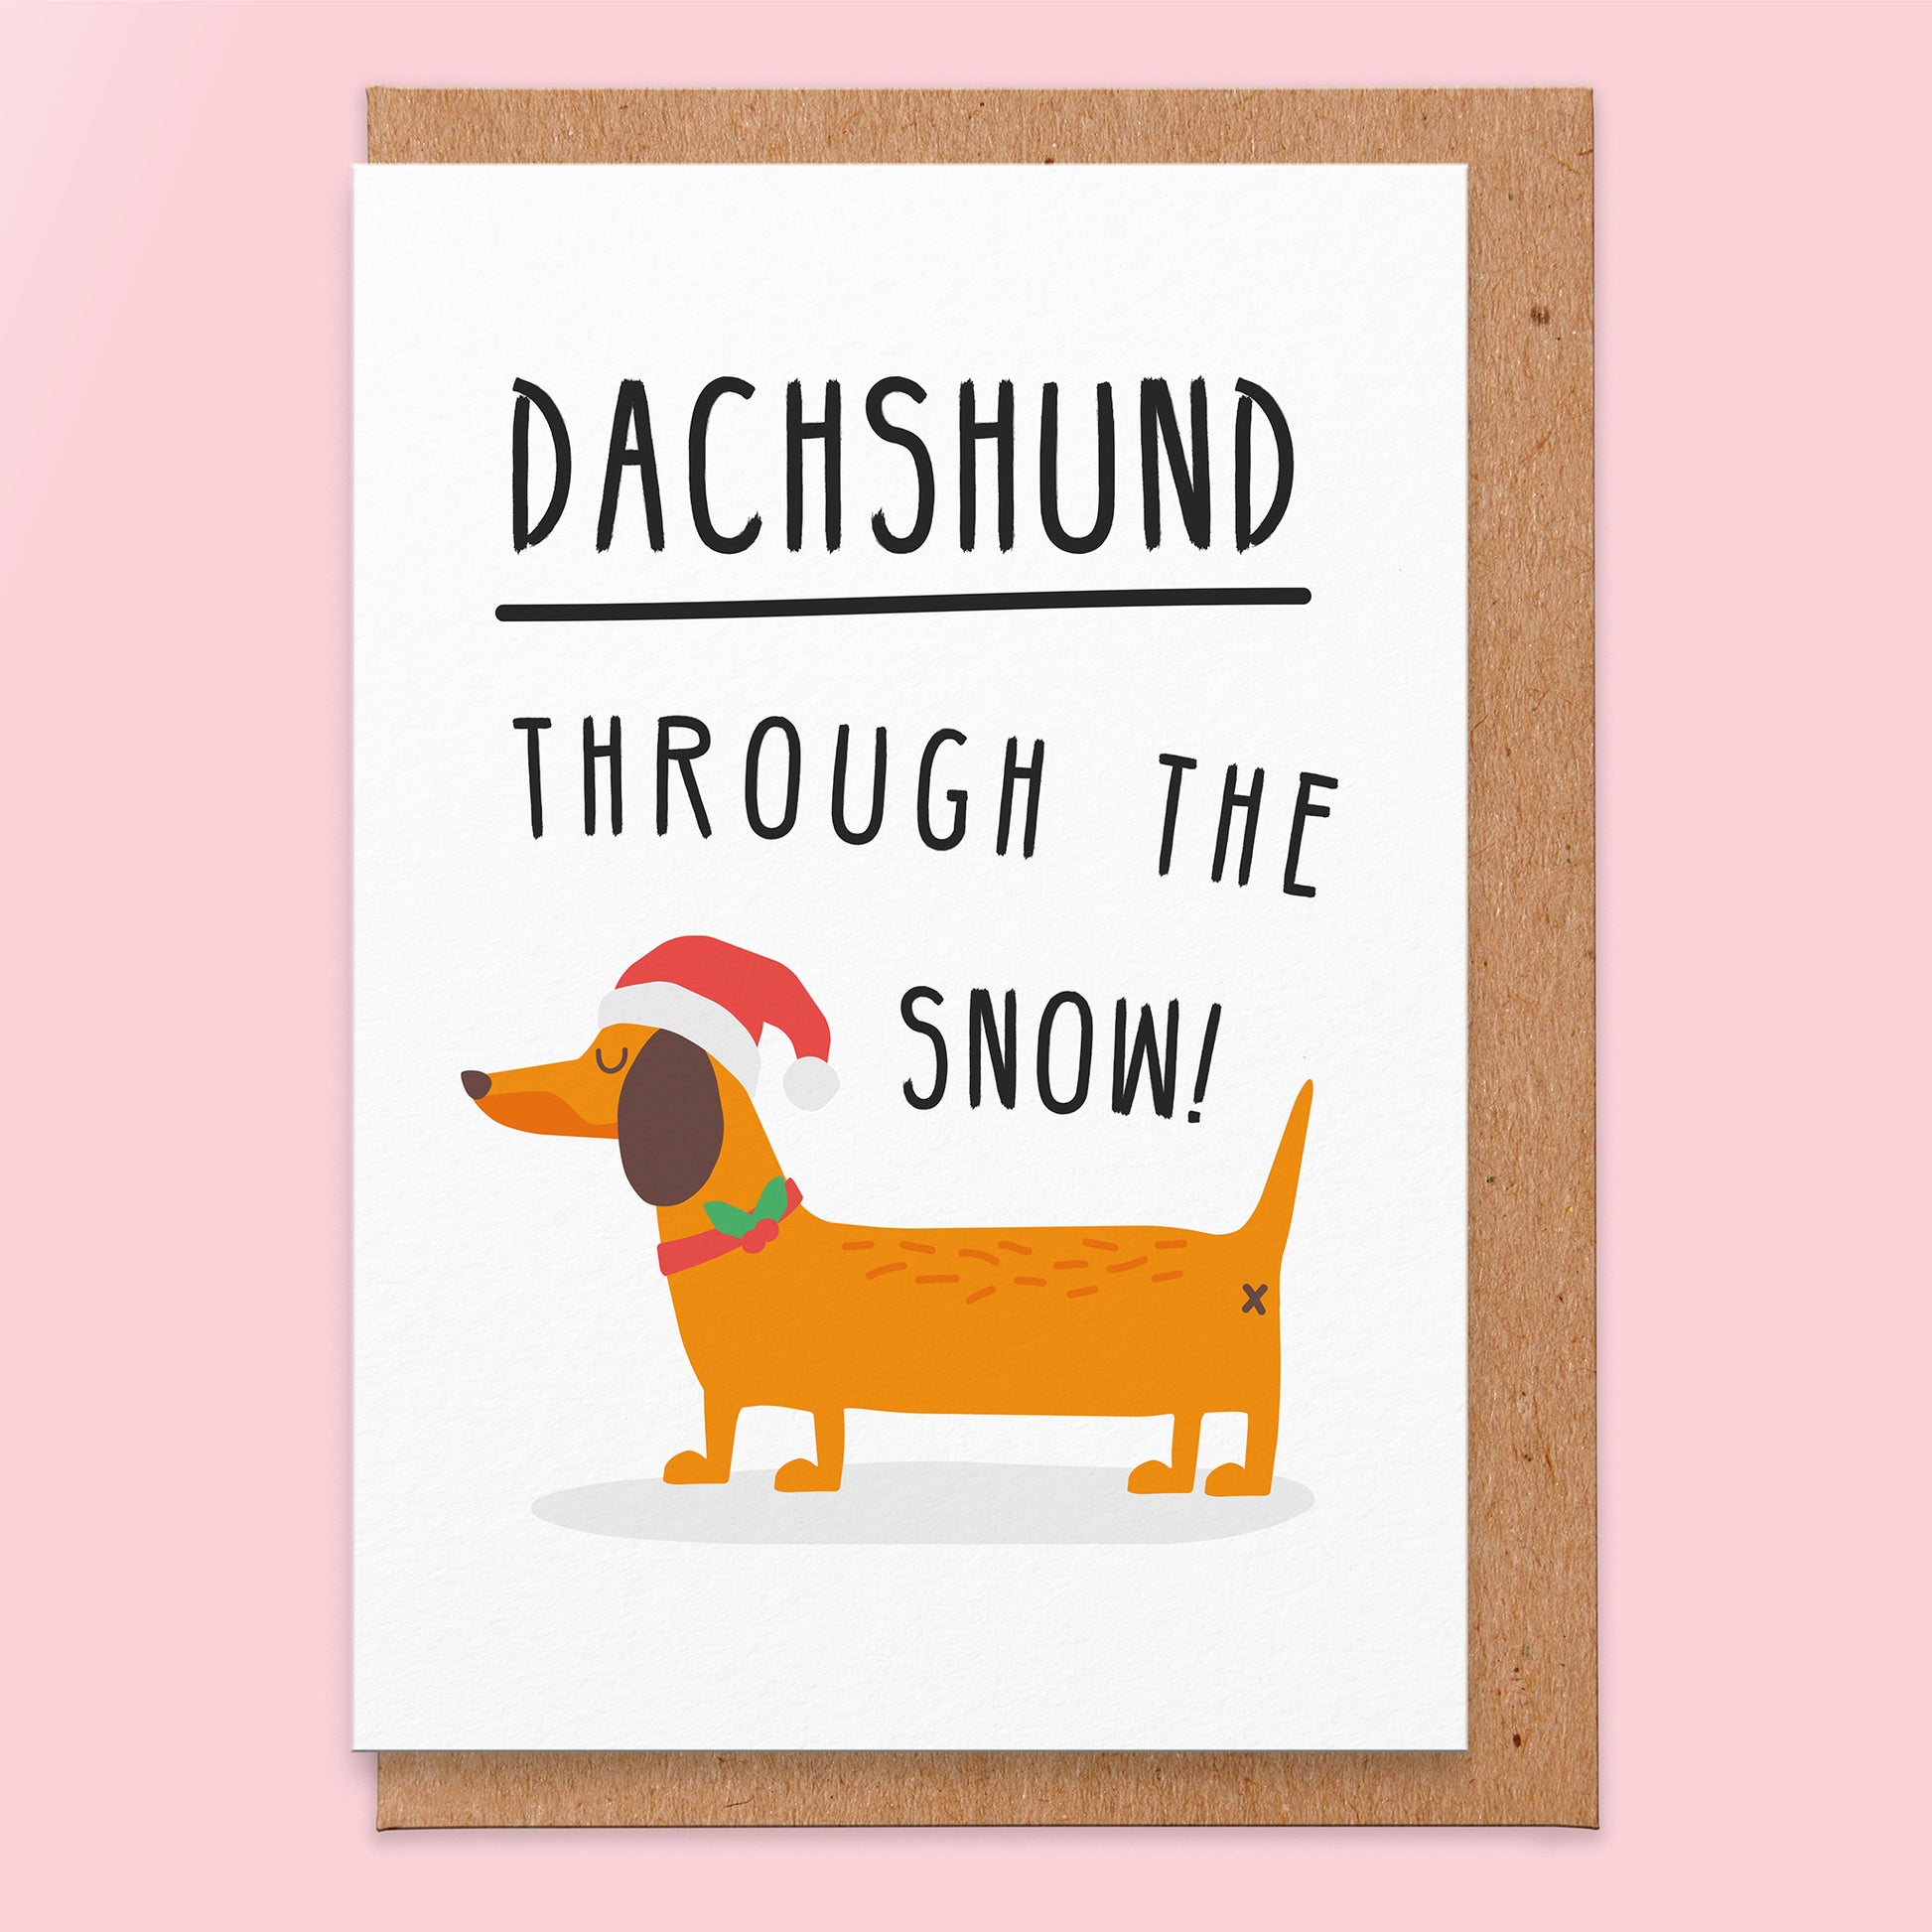 Christmas greeting card that has an illustration of a  Dachshund in a Santa hat and says Dachshund Through The Snow!